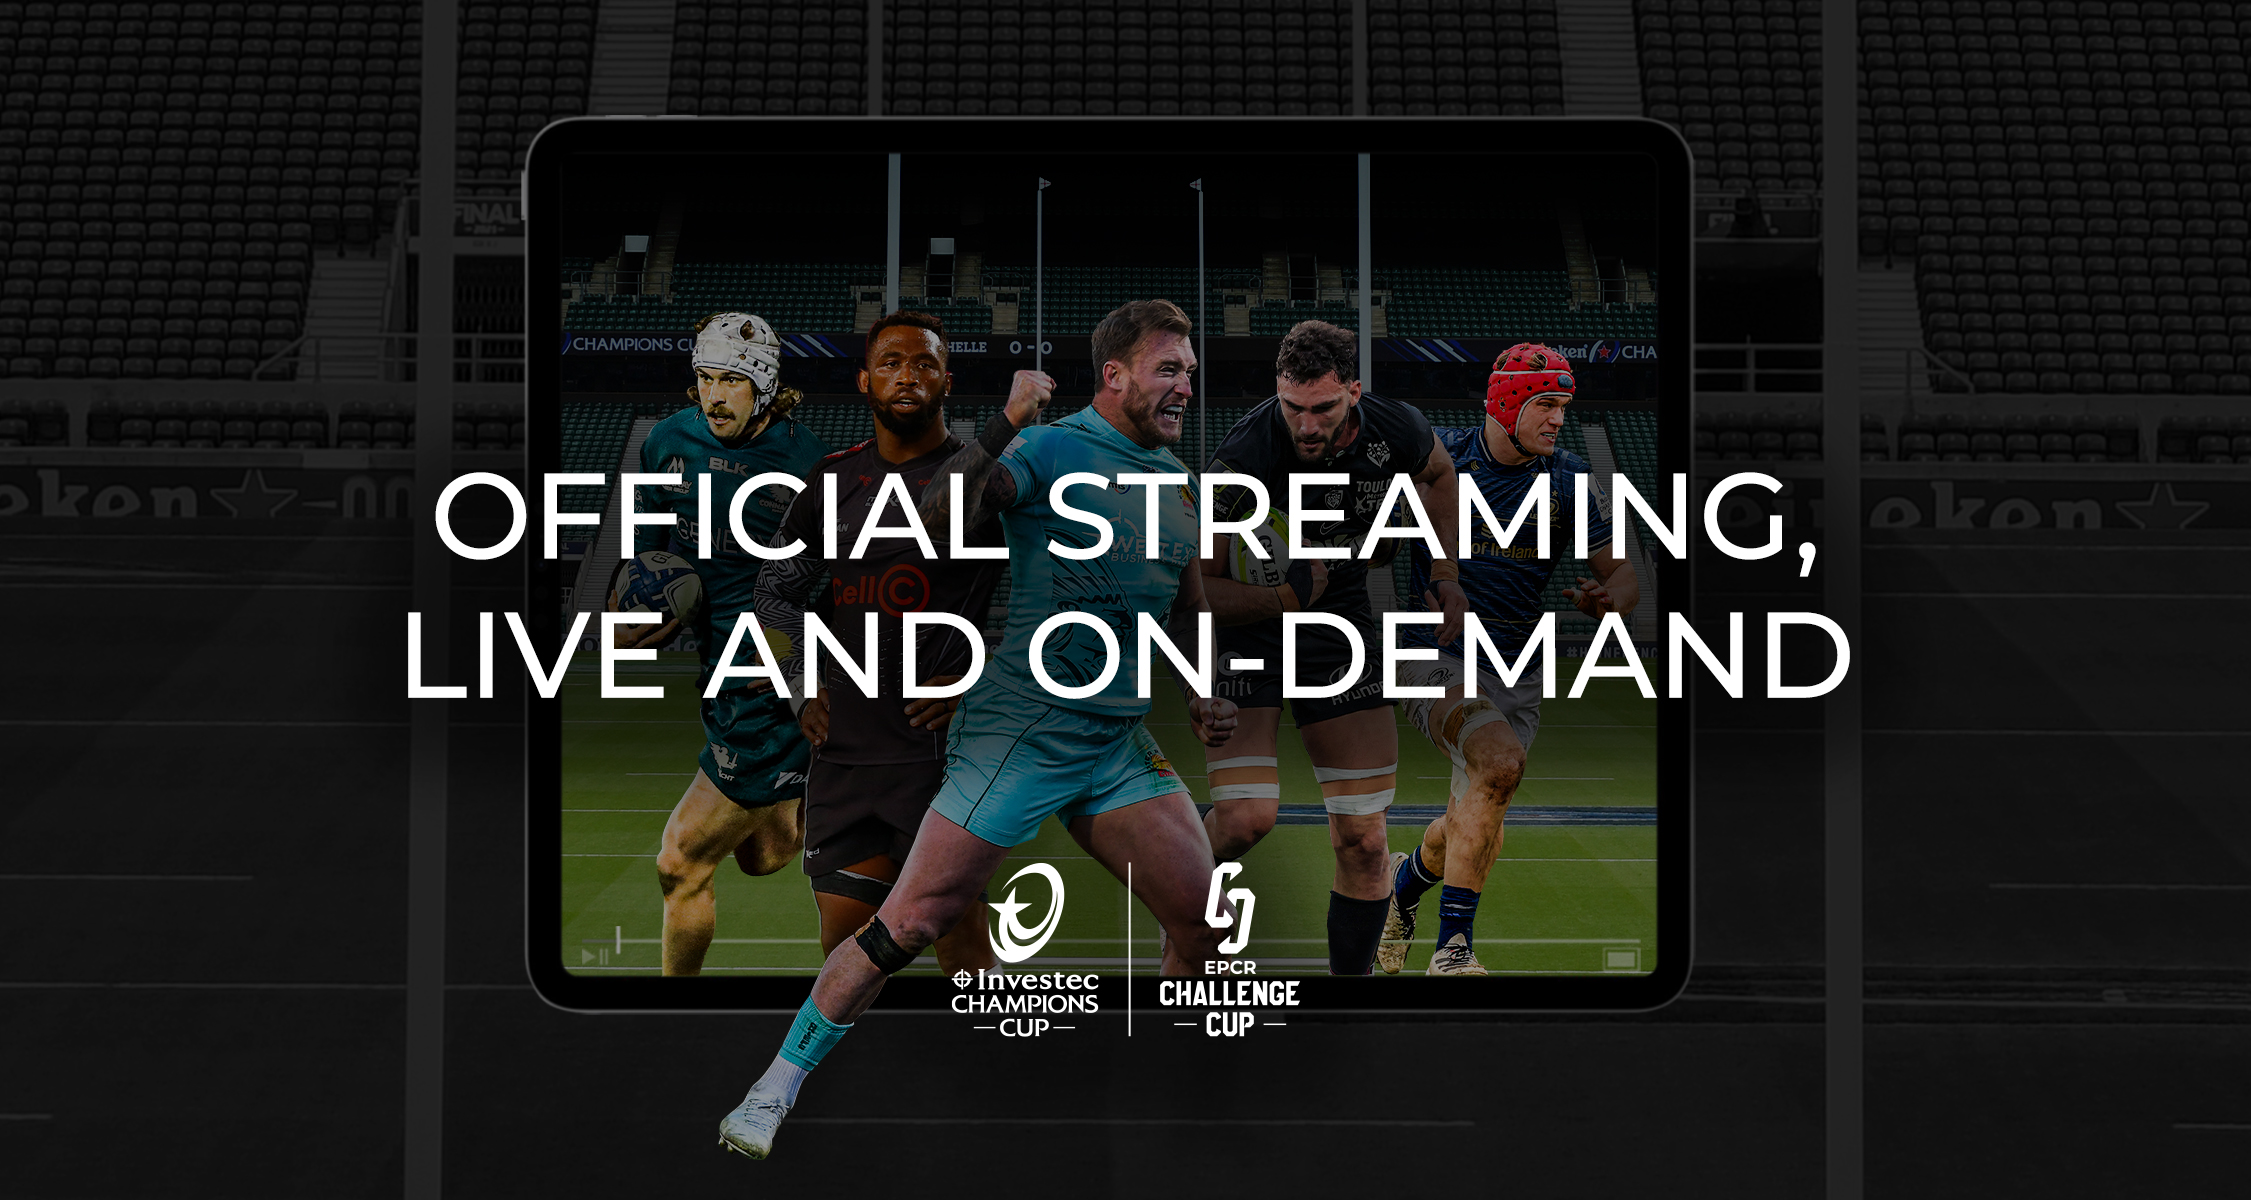 Heineken Champions Cup and EPCR Challenge Cup Live streaming